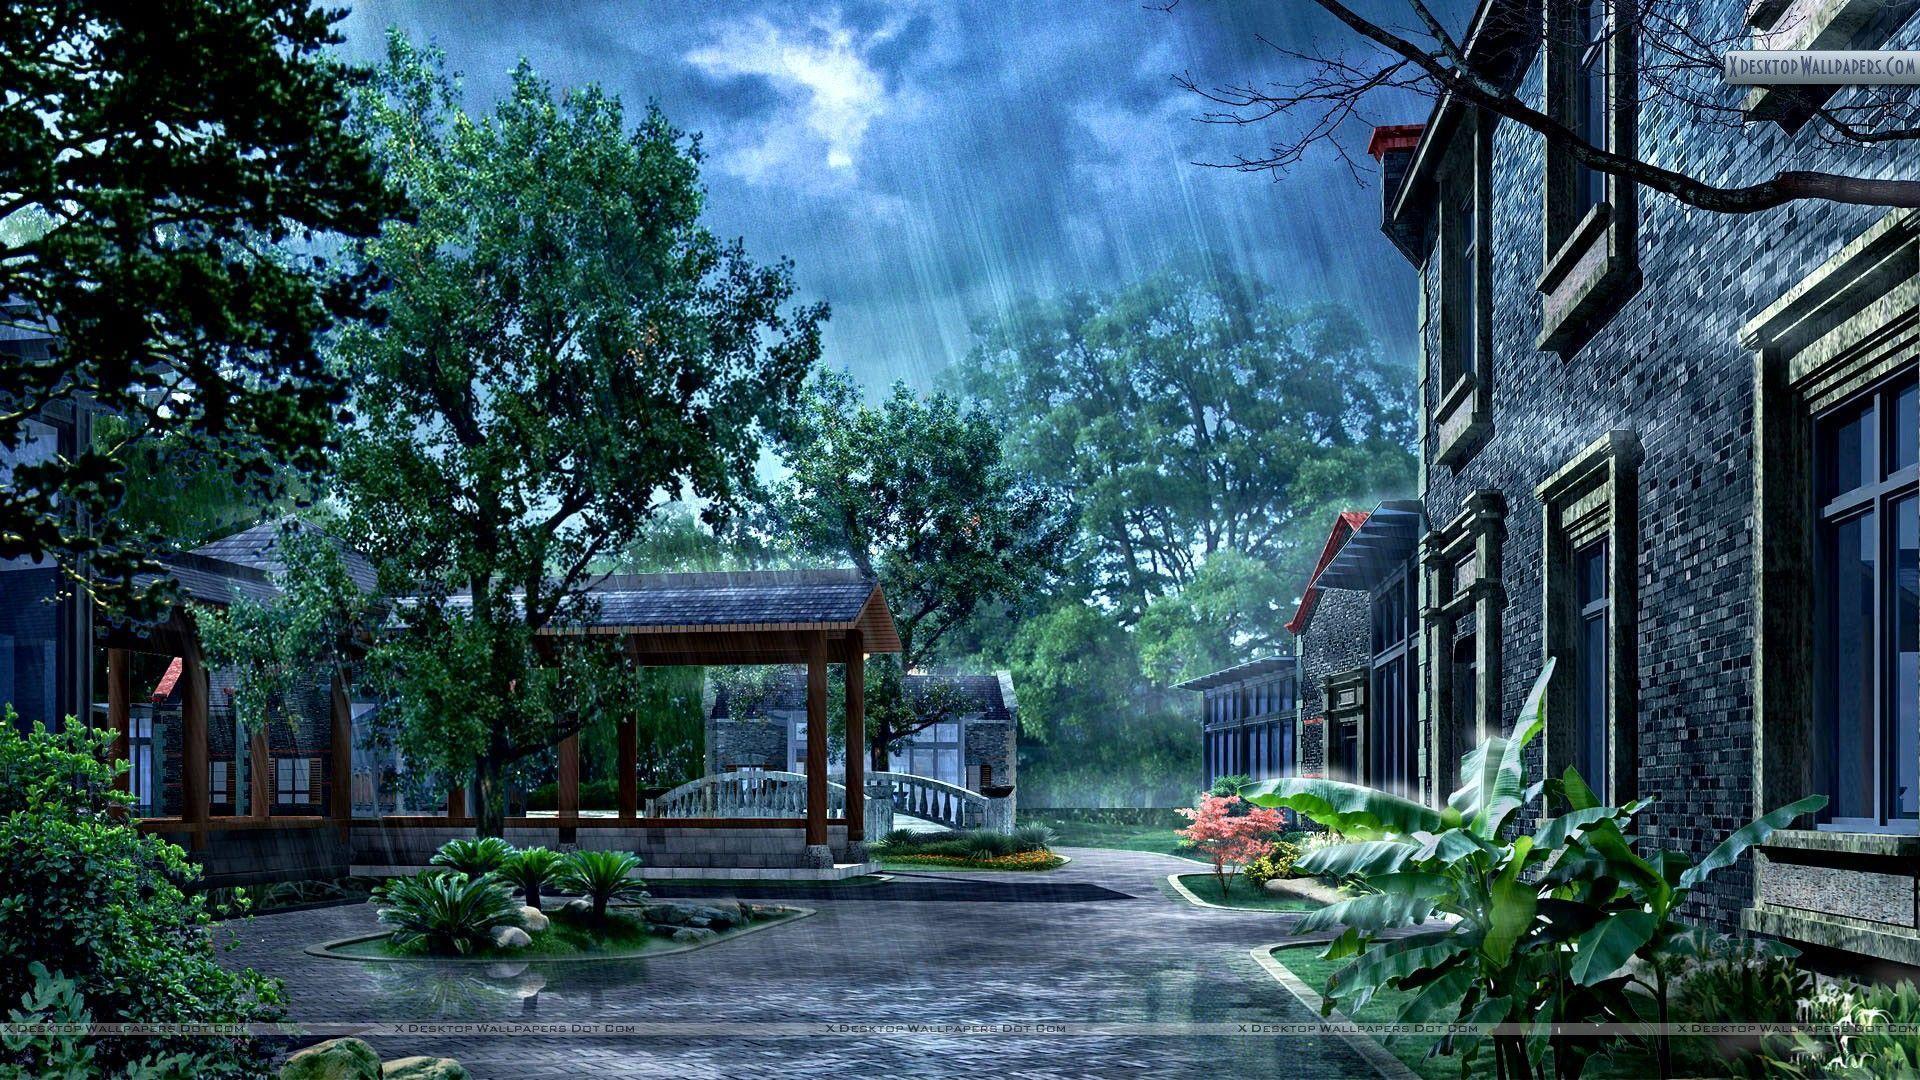 Rainy Day Backgrounds - Wallpaper Cave